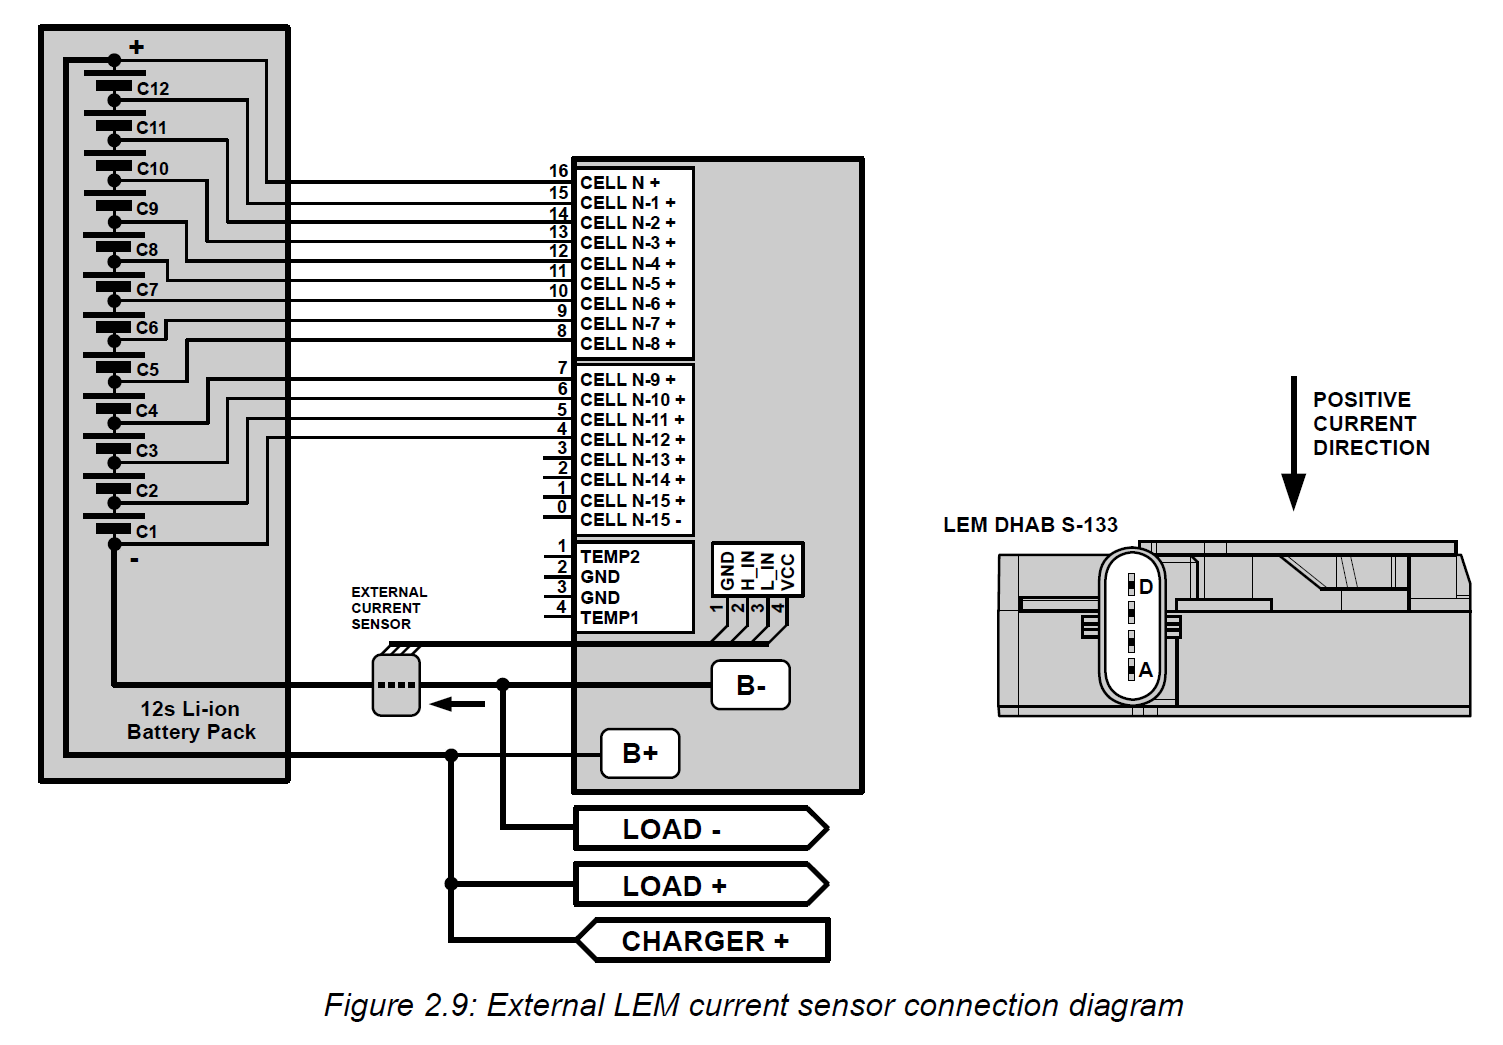 External LEM DHAB S - 133 current sensor connection diagram to Battery Management System (BMS) For Prototype And Industrial Applications 30A BMS, 150A BMS, 750A BMS